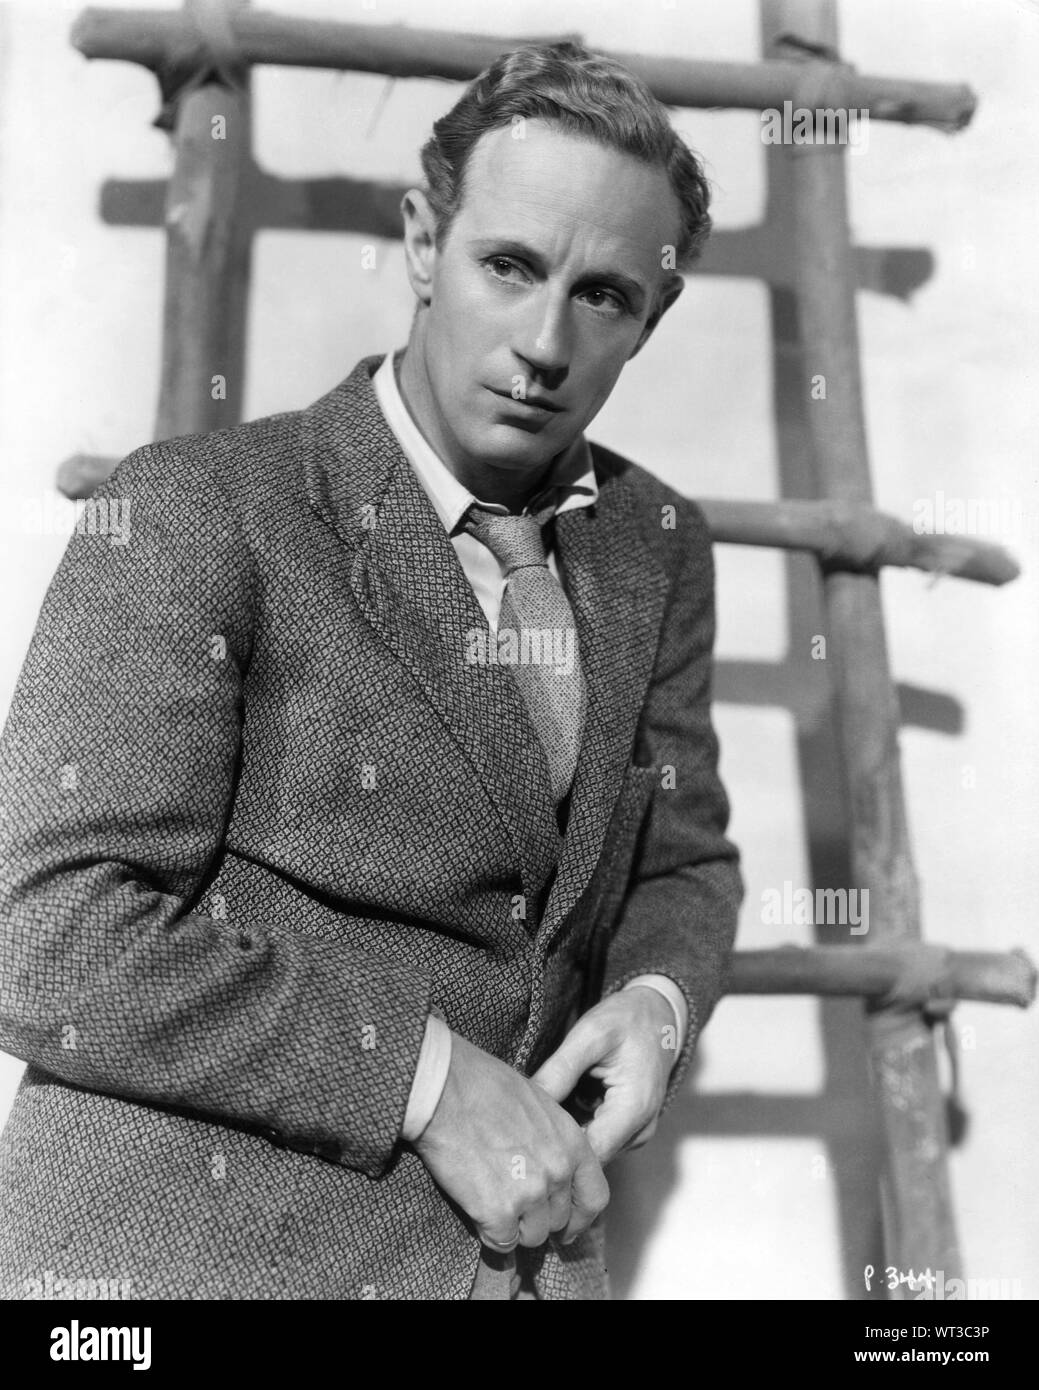 LESLIE HOWARD Portrait as Alan Squier in THE PETRIFIED FOREST 1936 director Archie Mayo based on the play by Robert E. Sherwood Warner Bros. Stock Photo